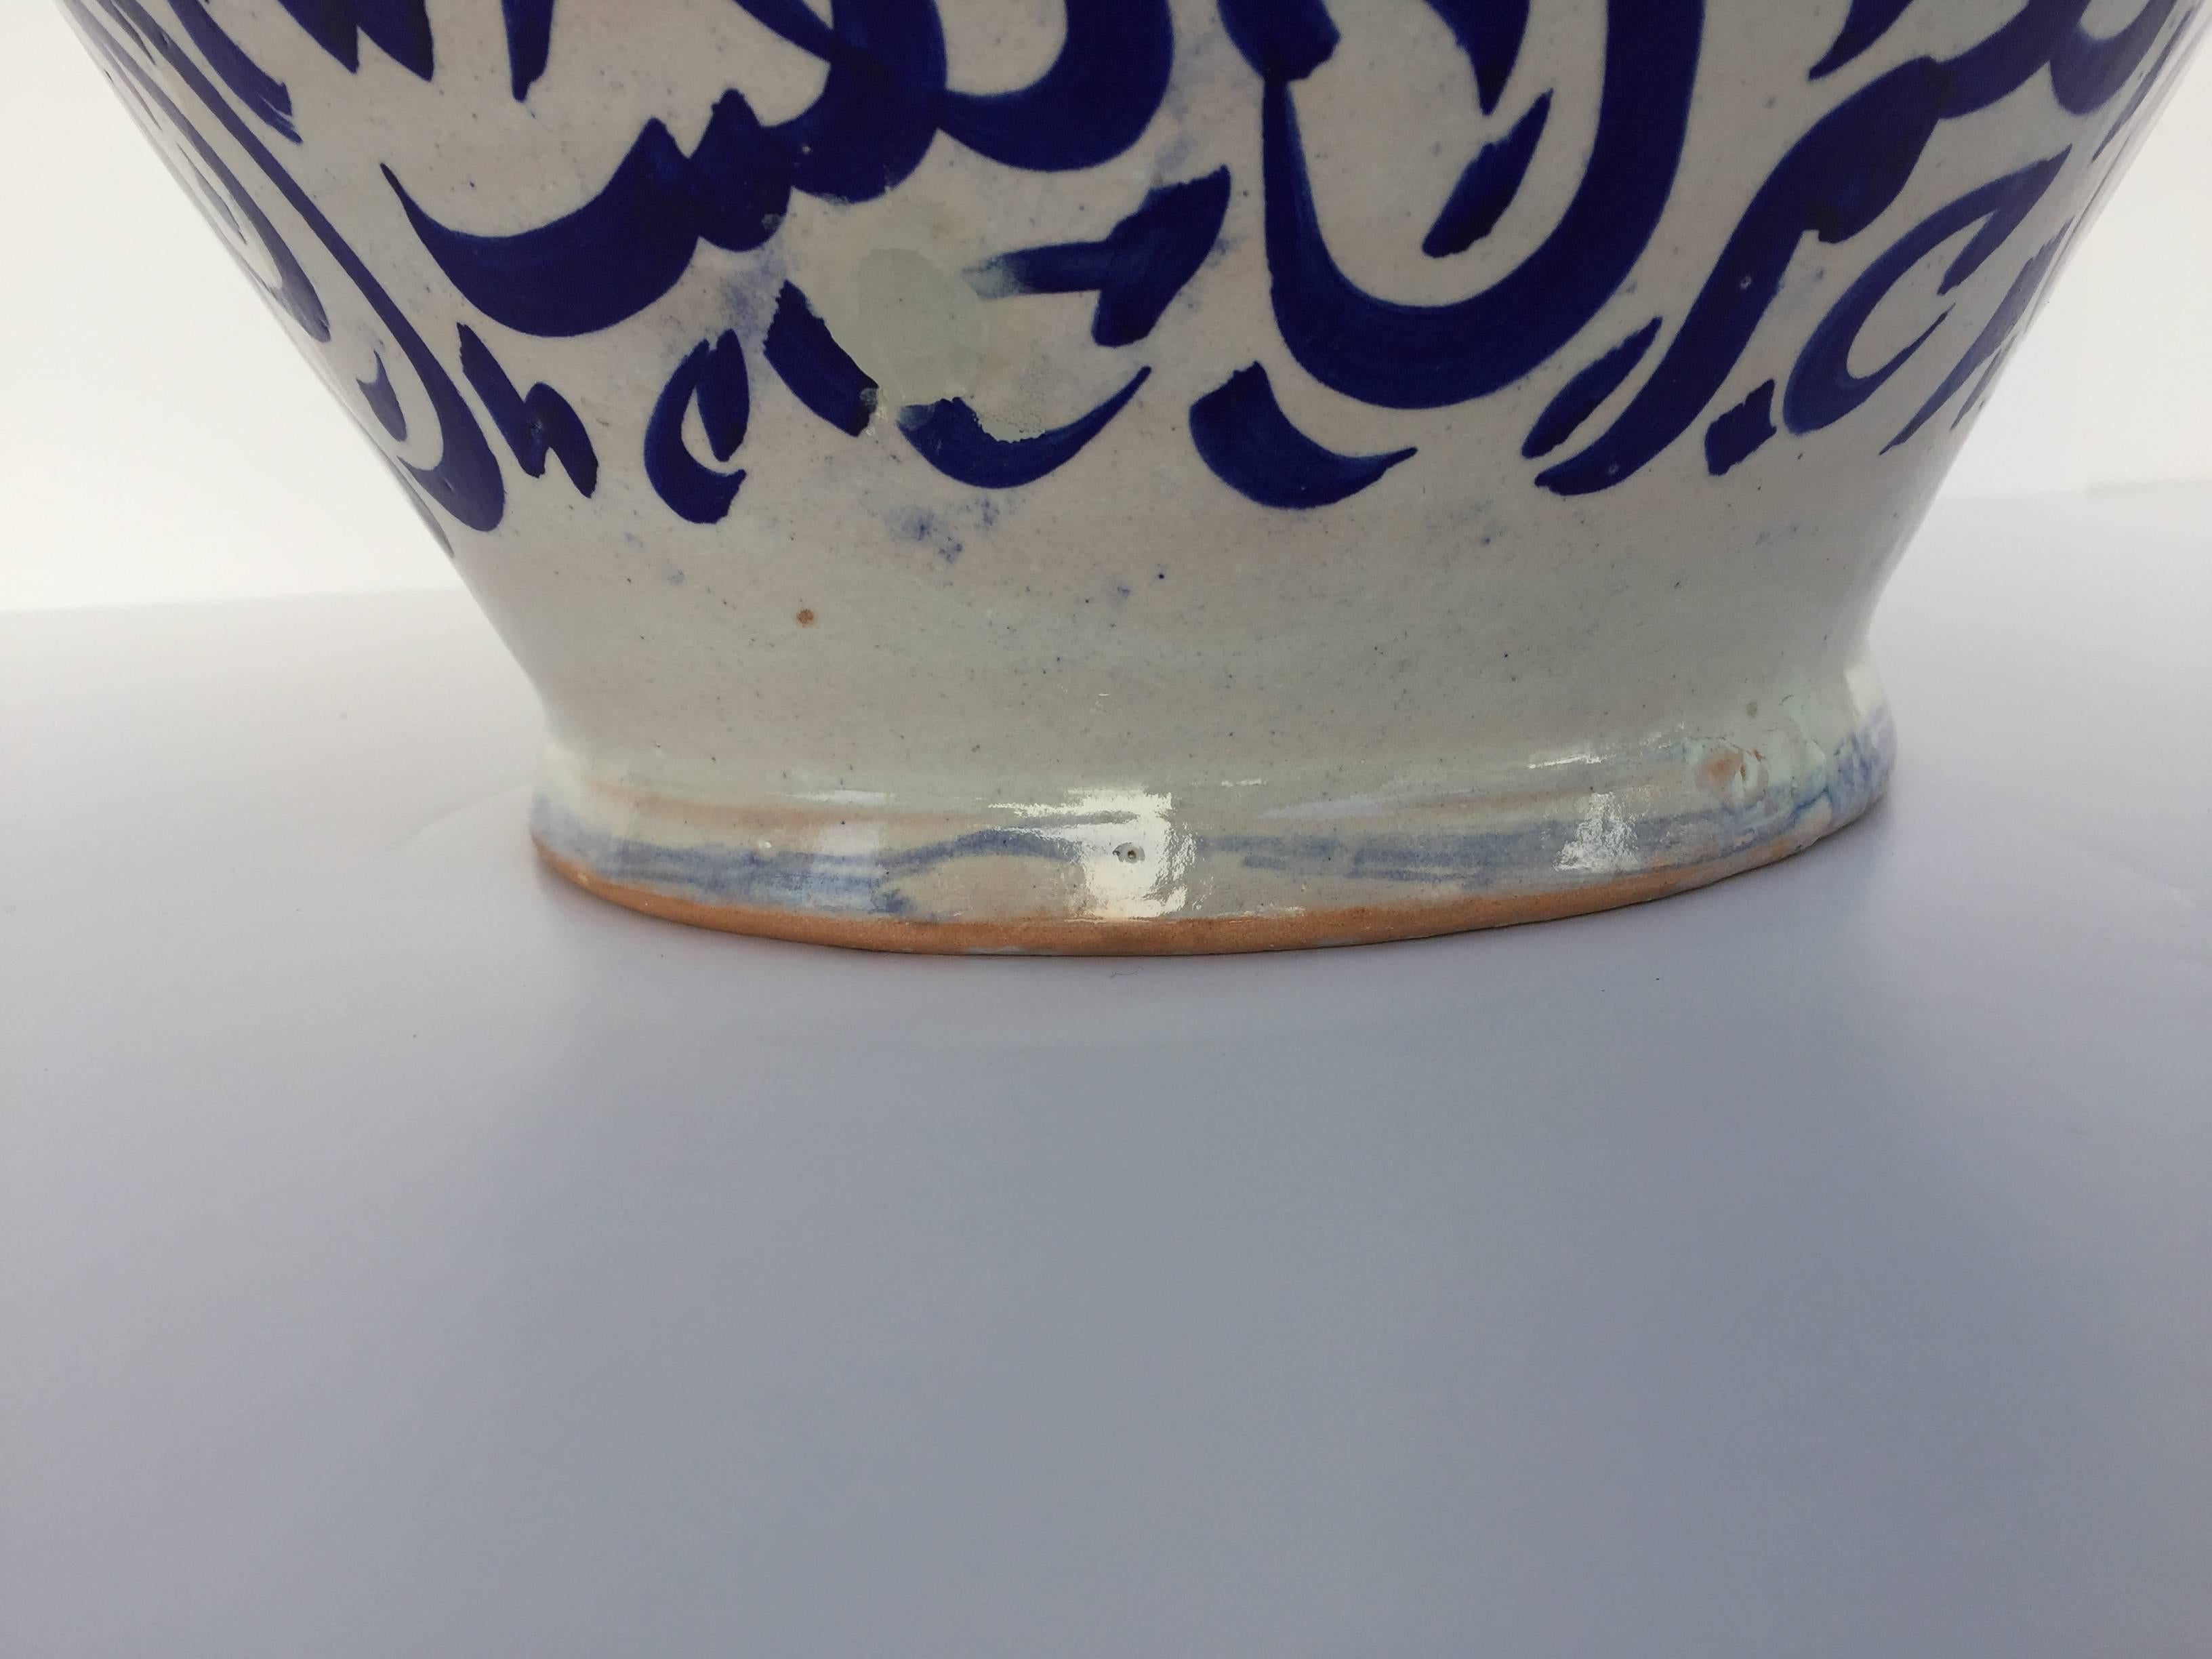 Hand-Crafted Large Moroccan Ceramic Vase from Fez with Blue Calligraphy Writing